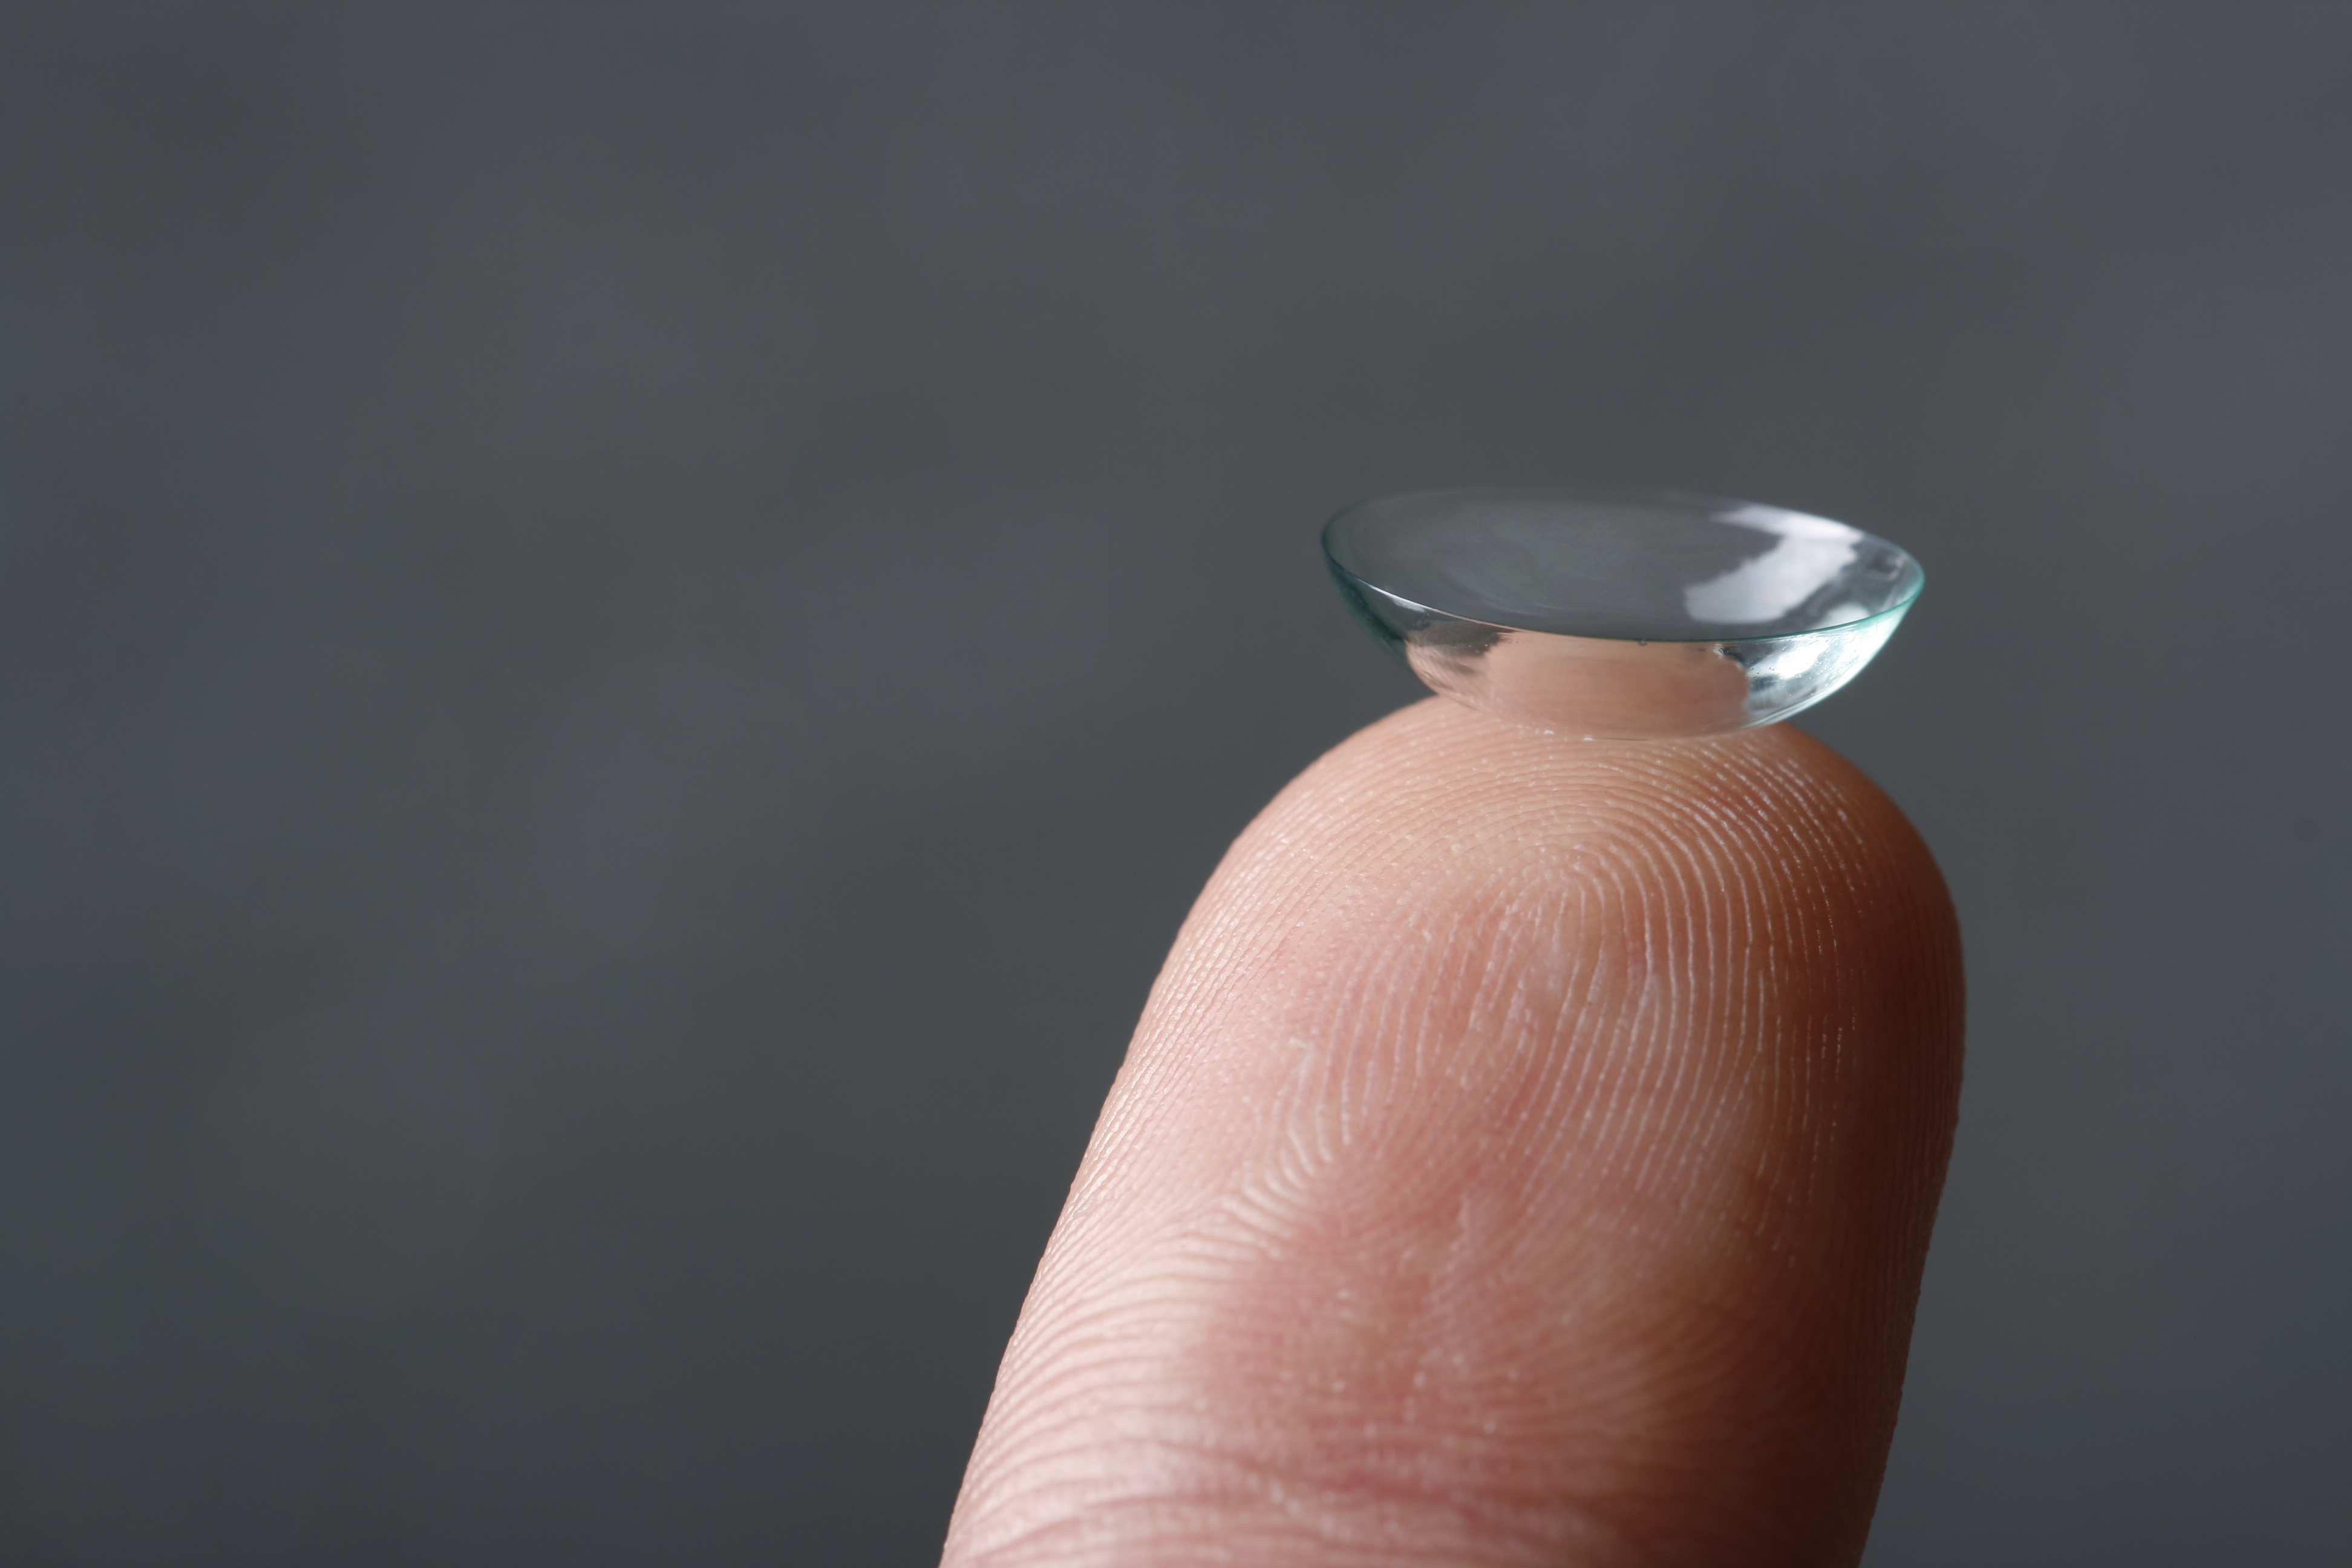 Contact lens on the finger photo